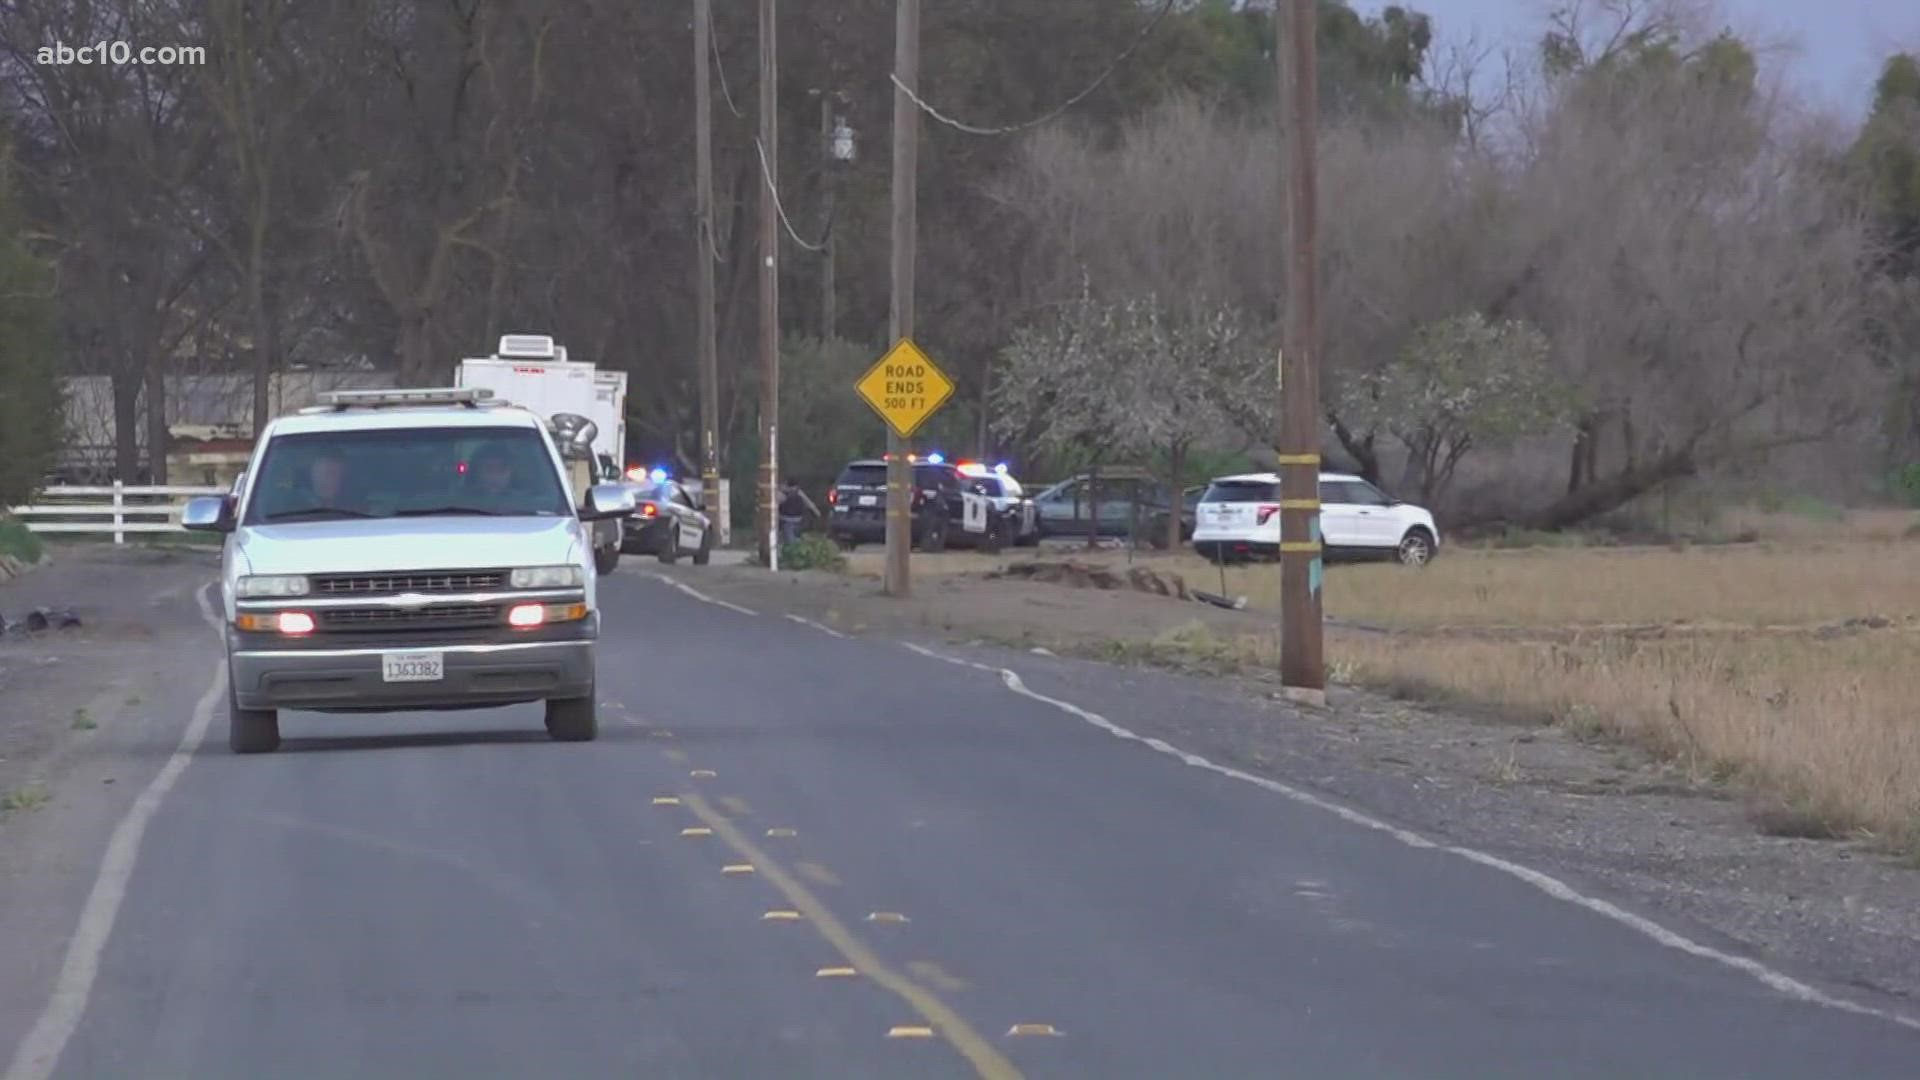 The San Joaquin County Sheriff's Office said they were unable to offer additional details at this time. The investigation is in the area of Roberts and Rolerson Road